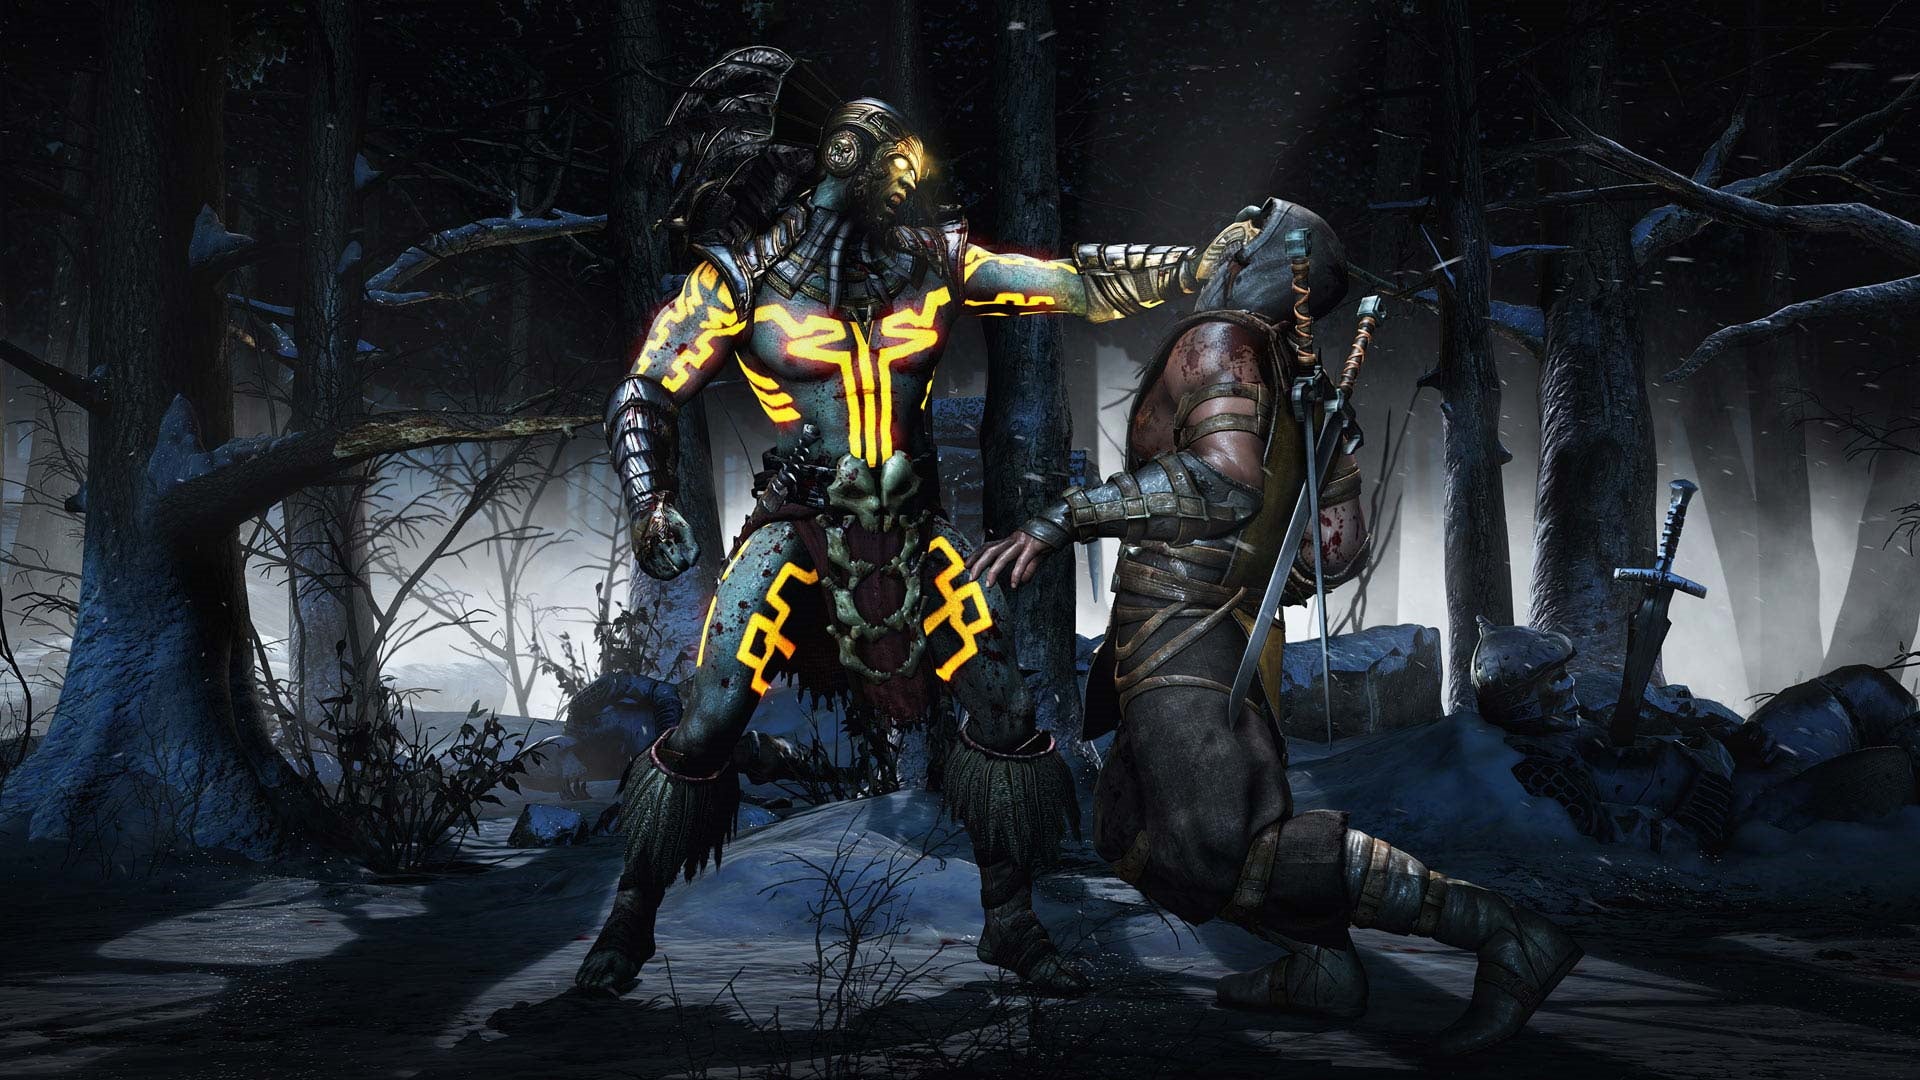 One player grabs another in Mortal Kombat X.